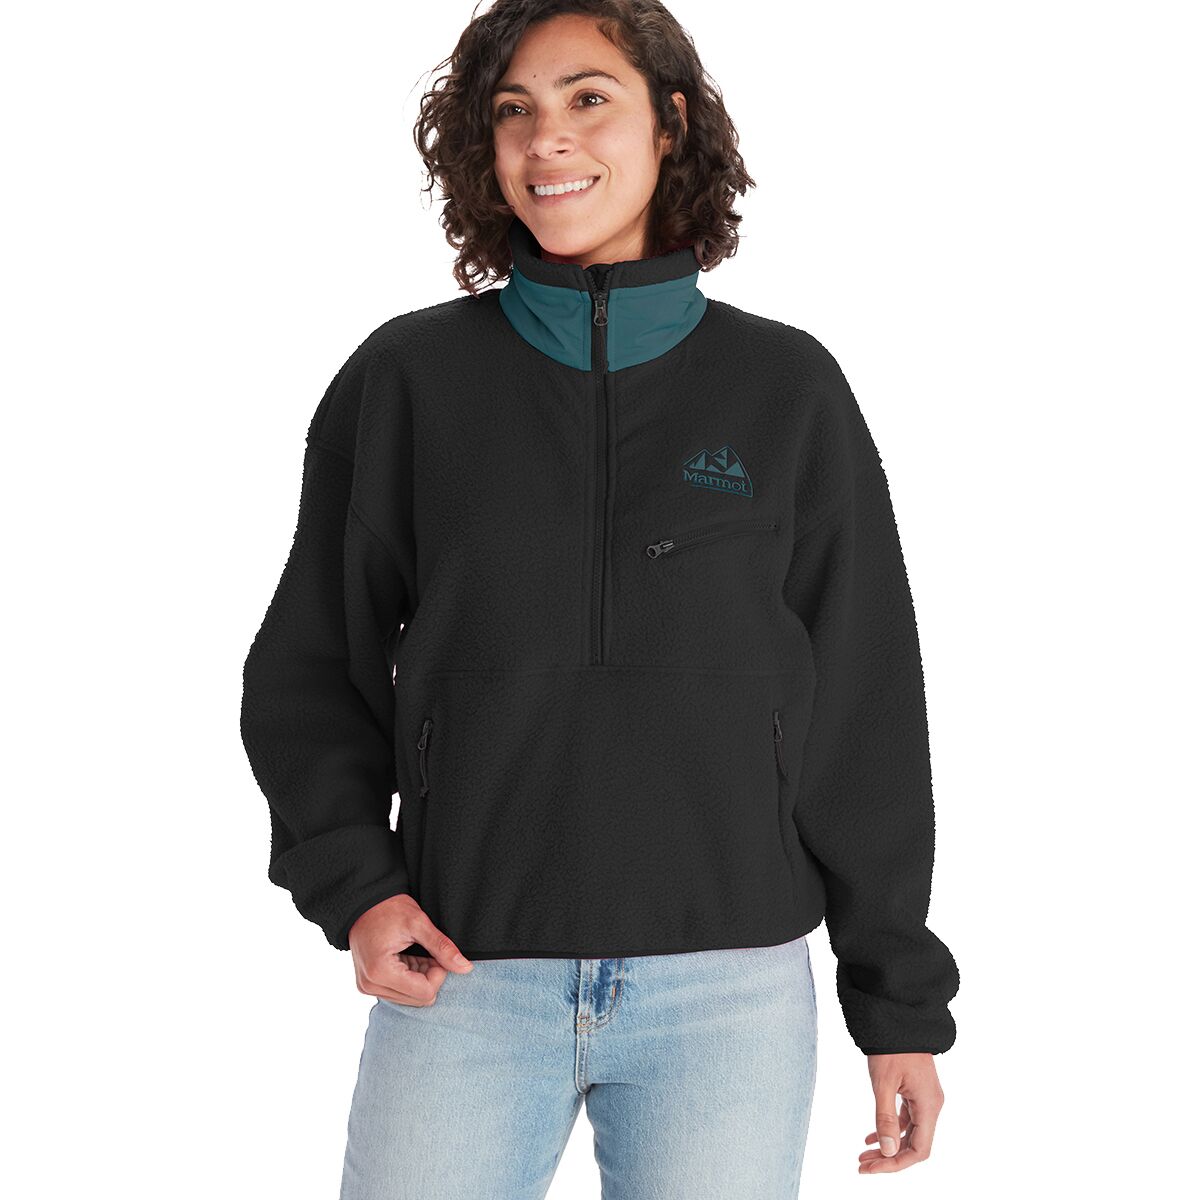 Marmot 94 E.C.O. Recycled Fleece - Women's, Victory Red — Womens Clothing  Size: Large, Length, Alpha: Regular, Sleeve Length: Regular, Apparel Fit:  Oversize — M14197-21749-L - 1 out of 15 models